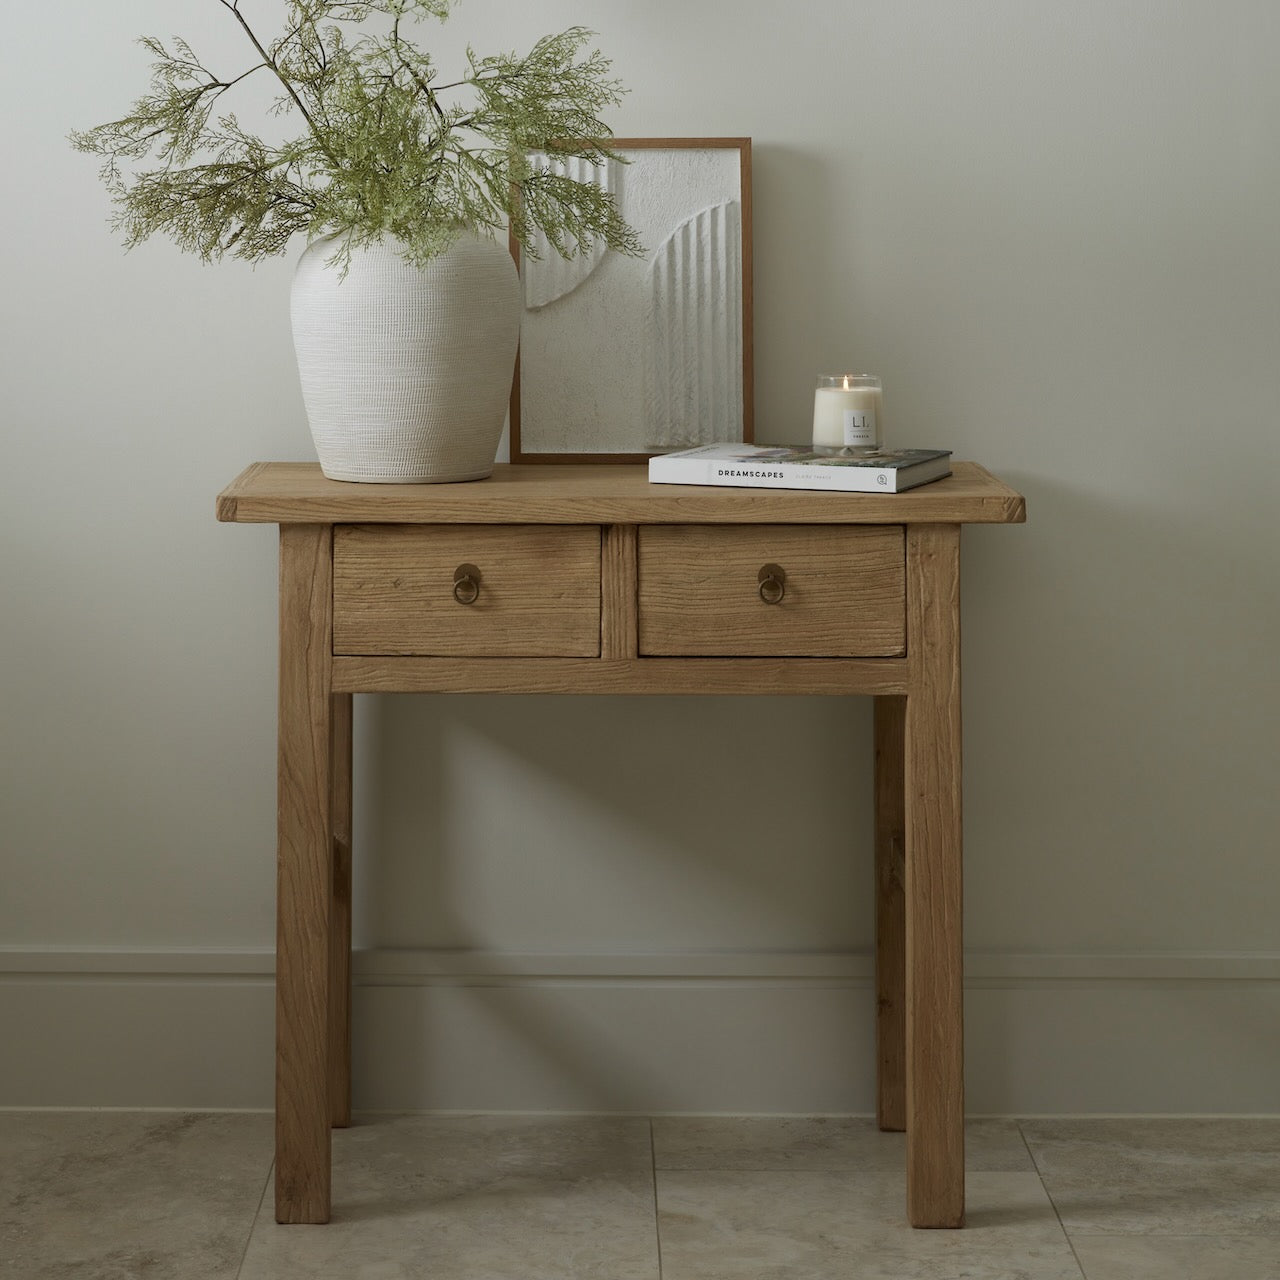 Bruton Reclaimed Wooden Console Table